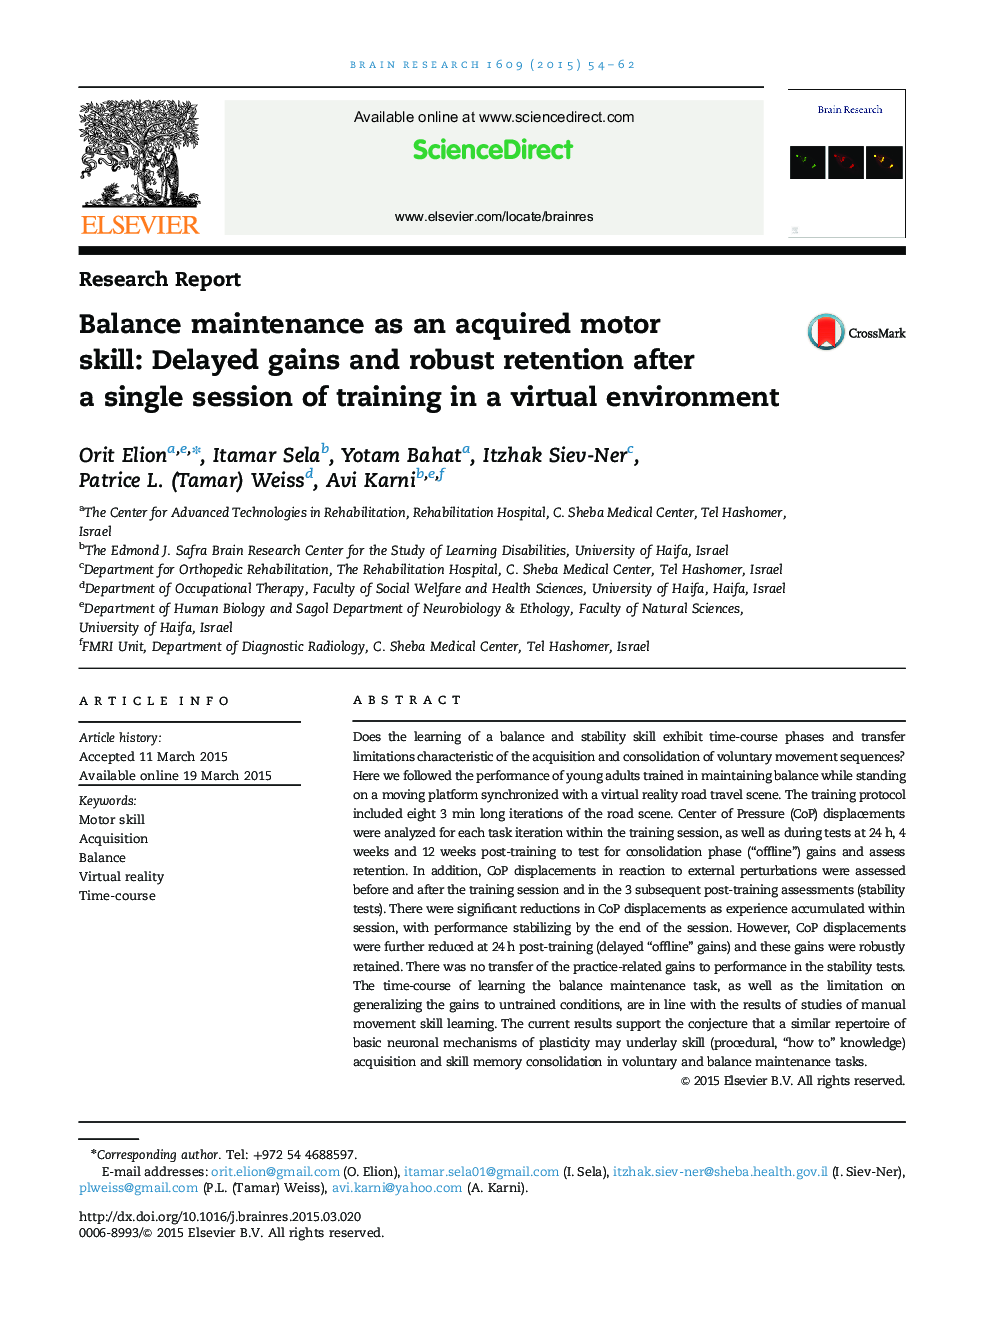 Balance maintenance as an acquired motor skill: Delayed gains and robust retention after a single session of training in a virtual environment